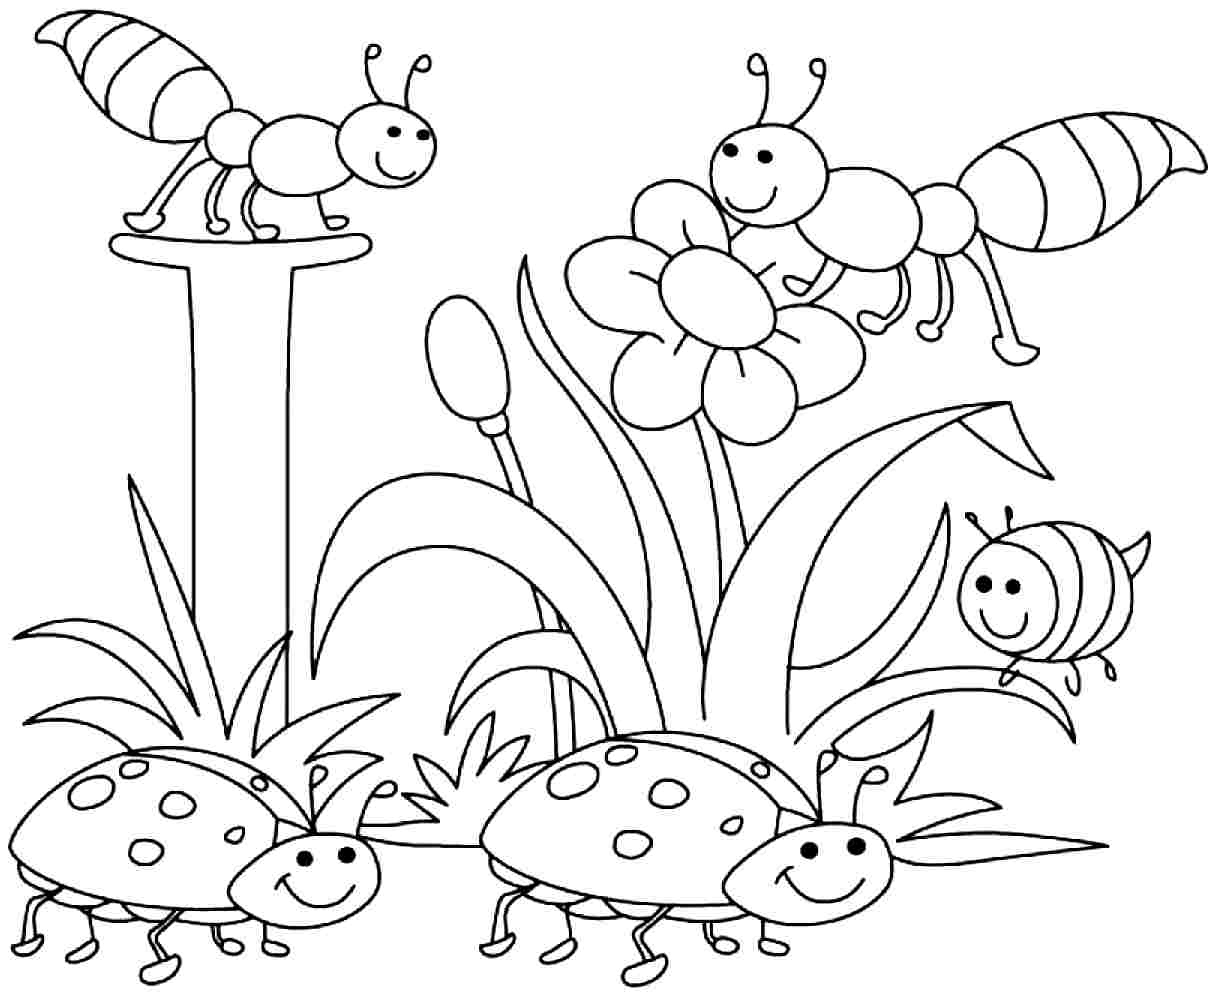 coloring-pages-for-toddlers-preschool-and-kindergarten-at-getdrawings